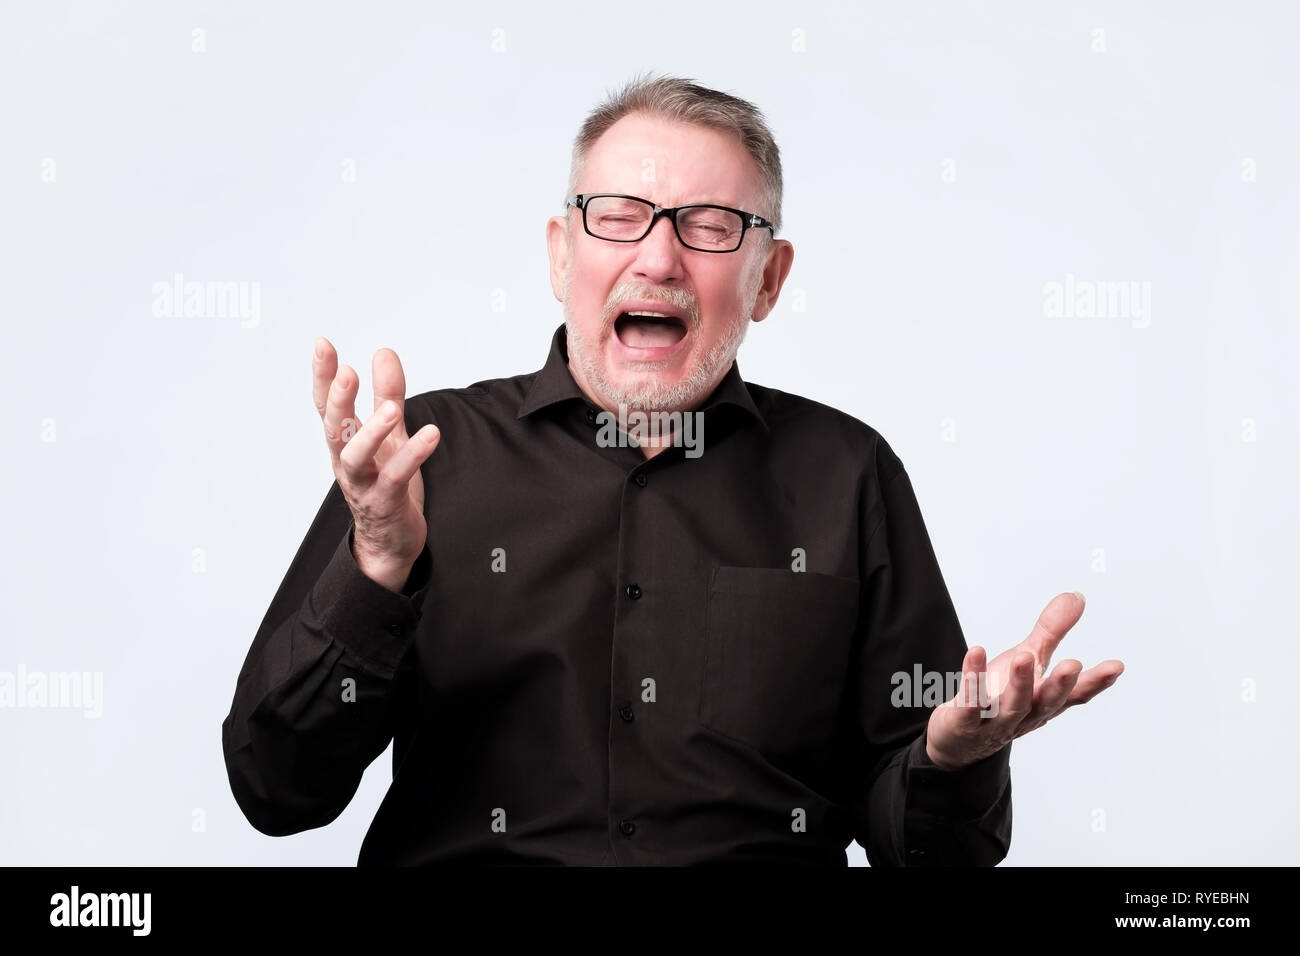 Angry shocked man screaming, isolated on white background. Stock Photo